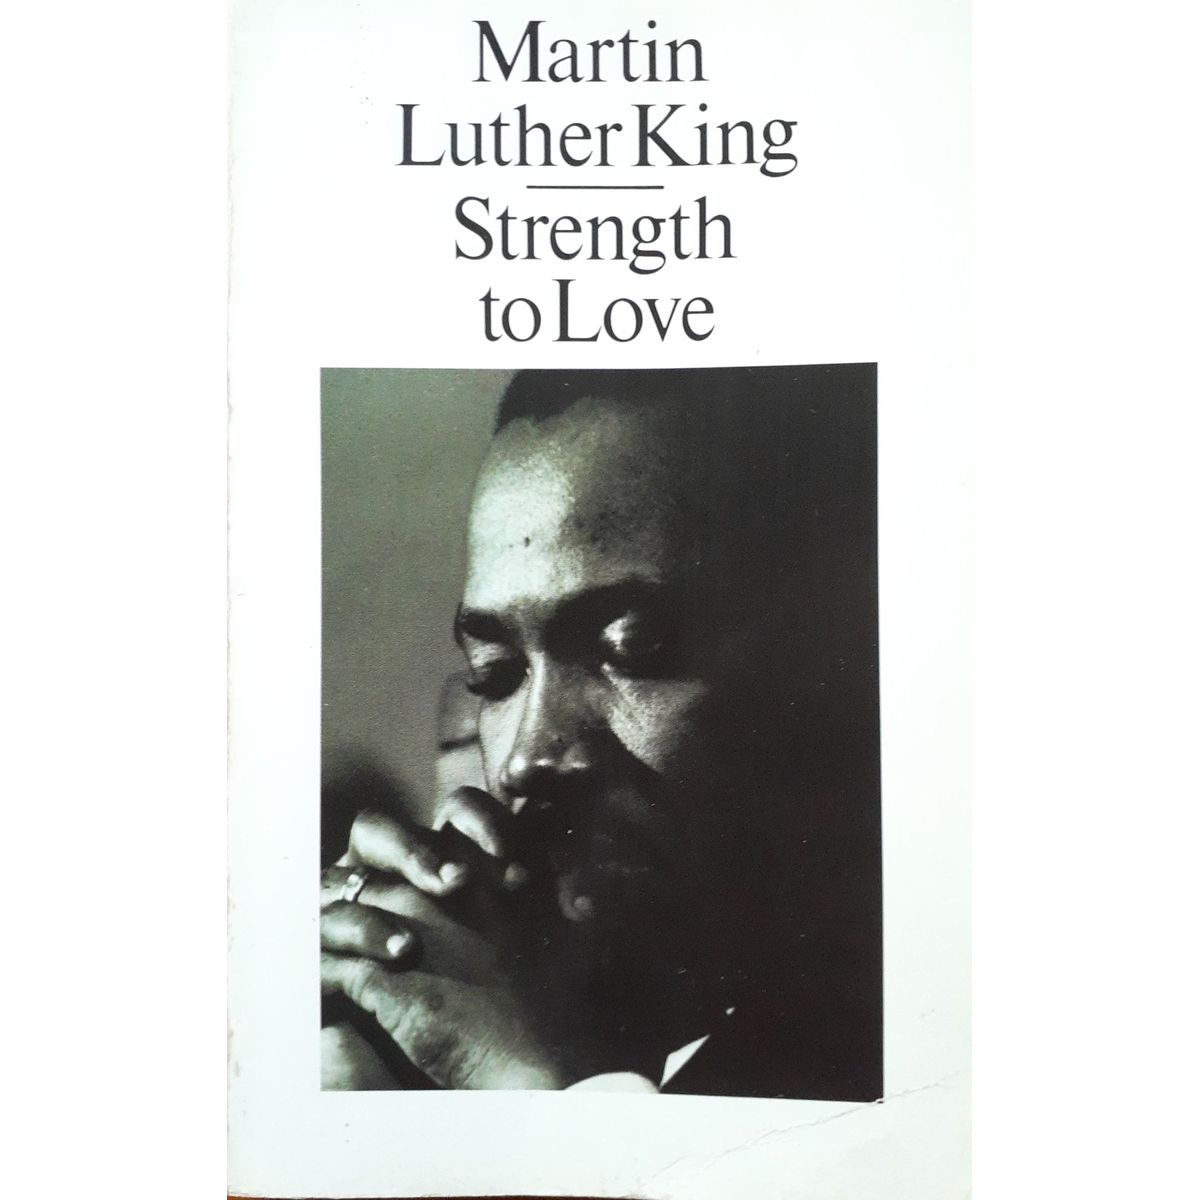 ISBN: 9780006250029 / 0006250025 - Strength to Love by Martin Luther King [1990]